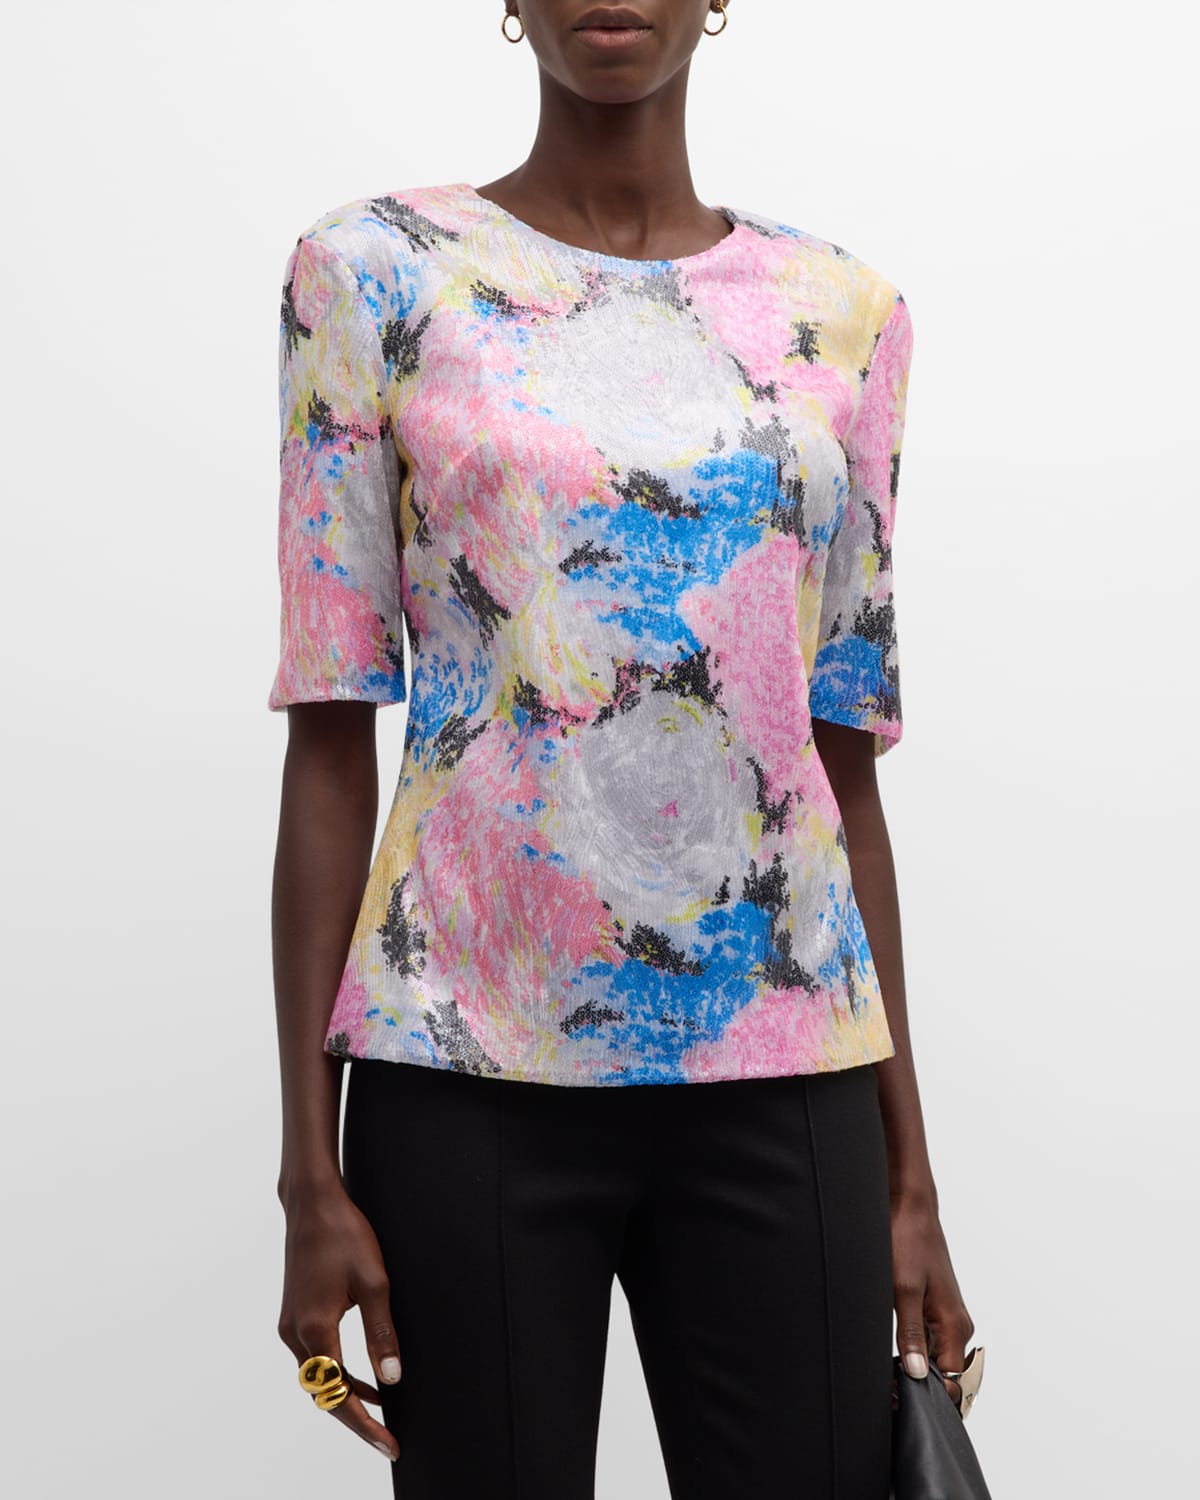 Painted Floral Sequin Mesh Sequin Fitted T-Shirt